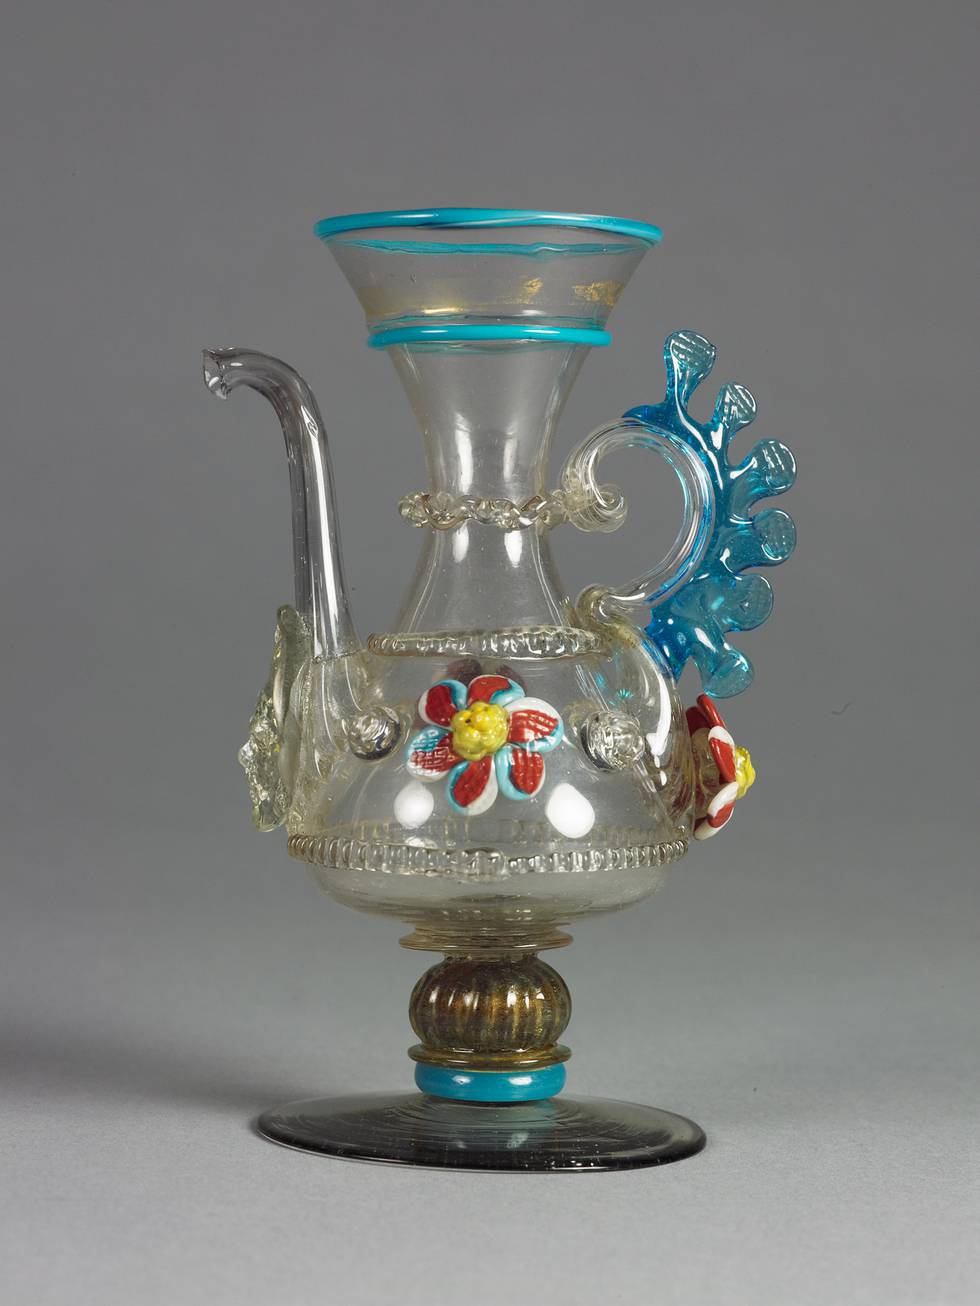 Photograph of a blue and yellow patterned Venetian glass vessel